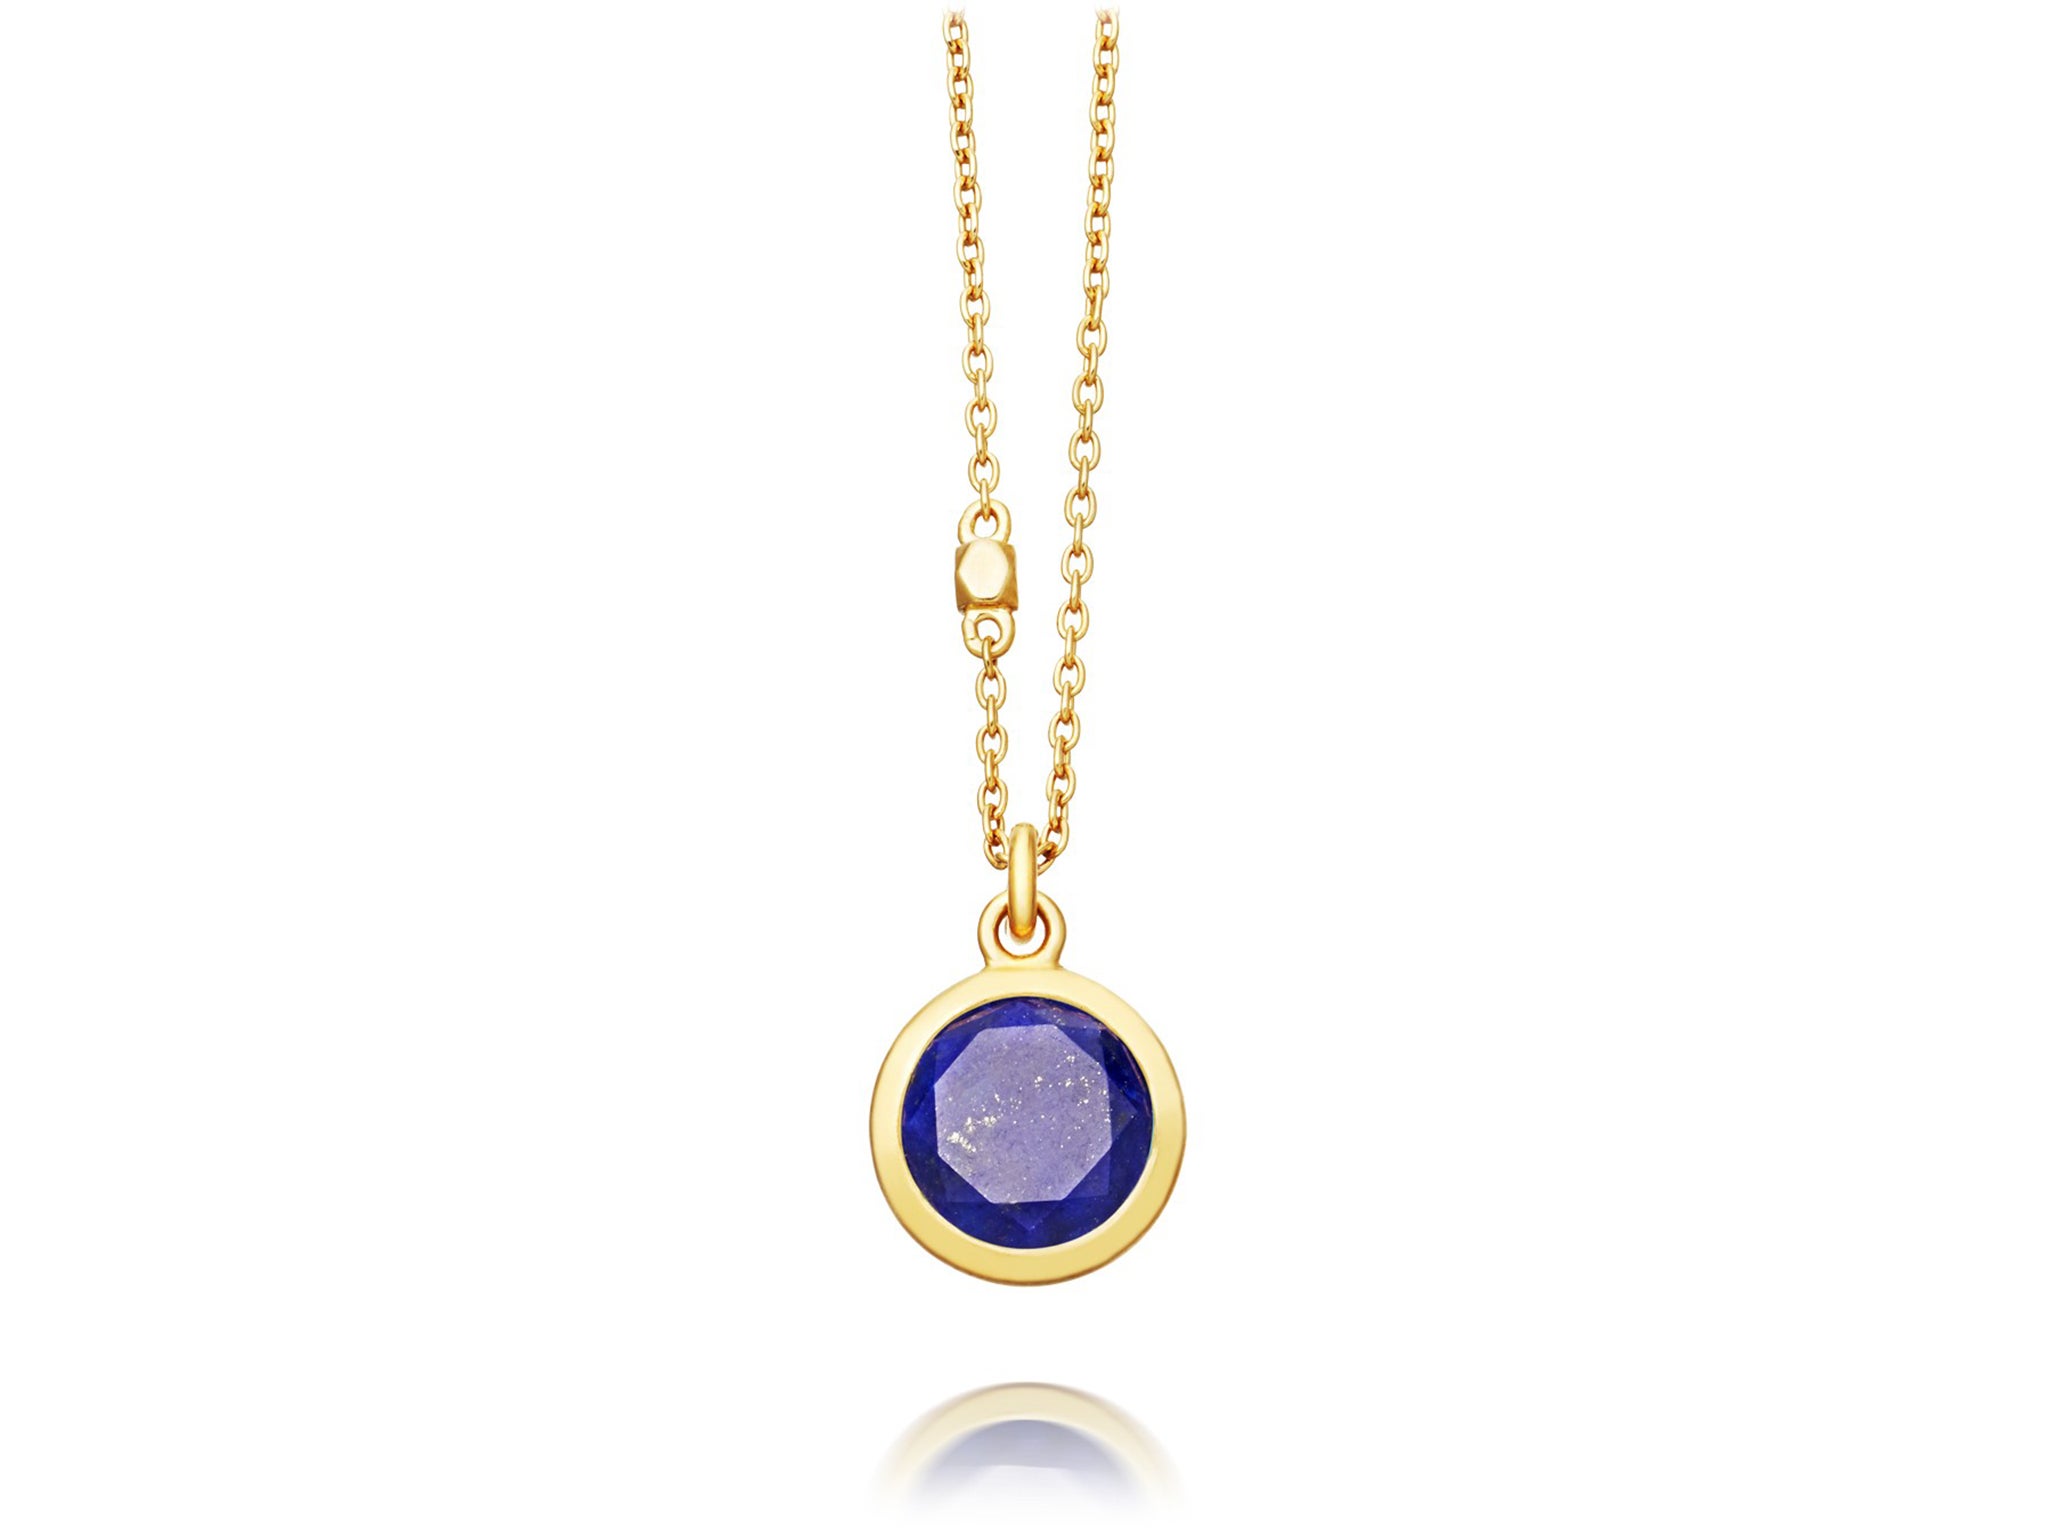 9ct Gold Lapis Lazuli Pendant and 18" Chain Gift Boxed Necklace Made in UK 